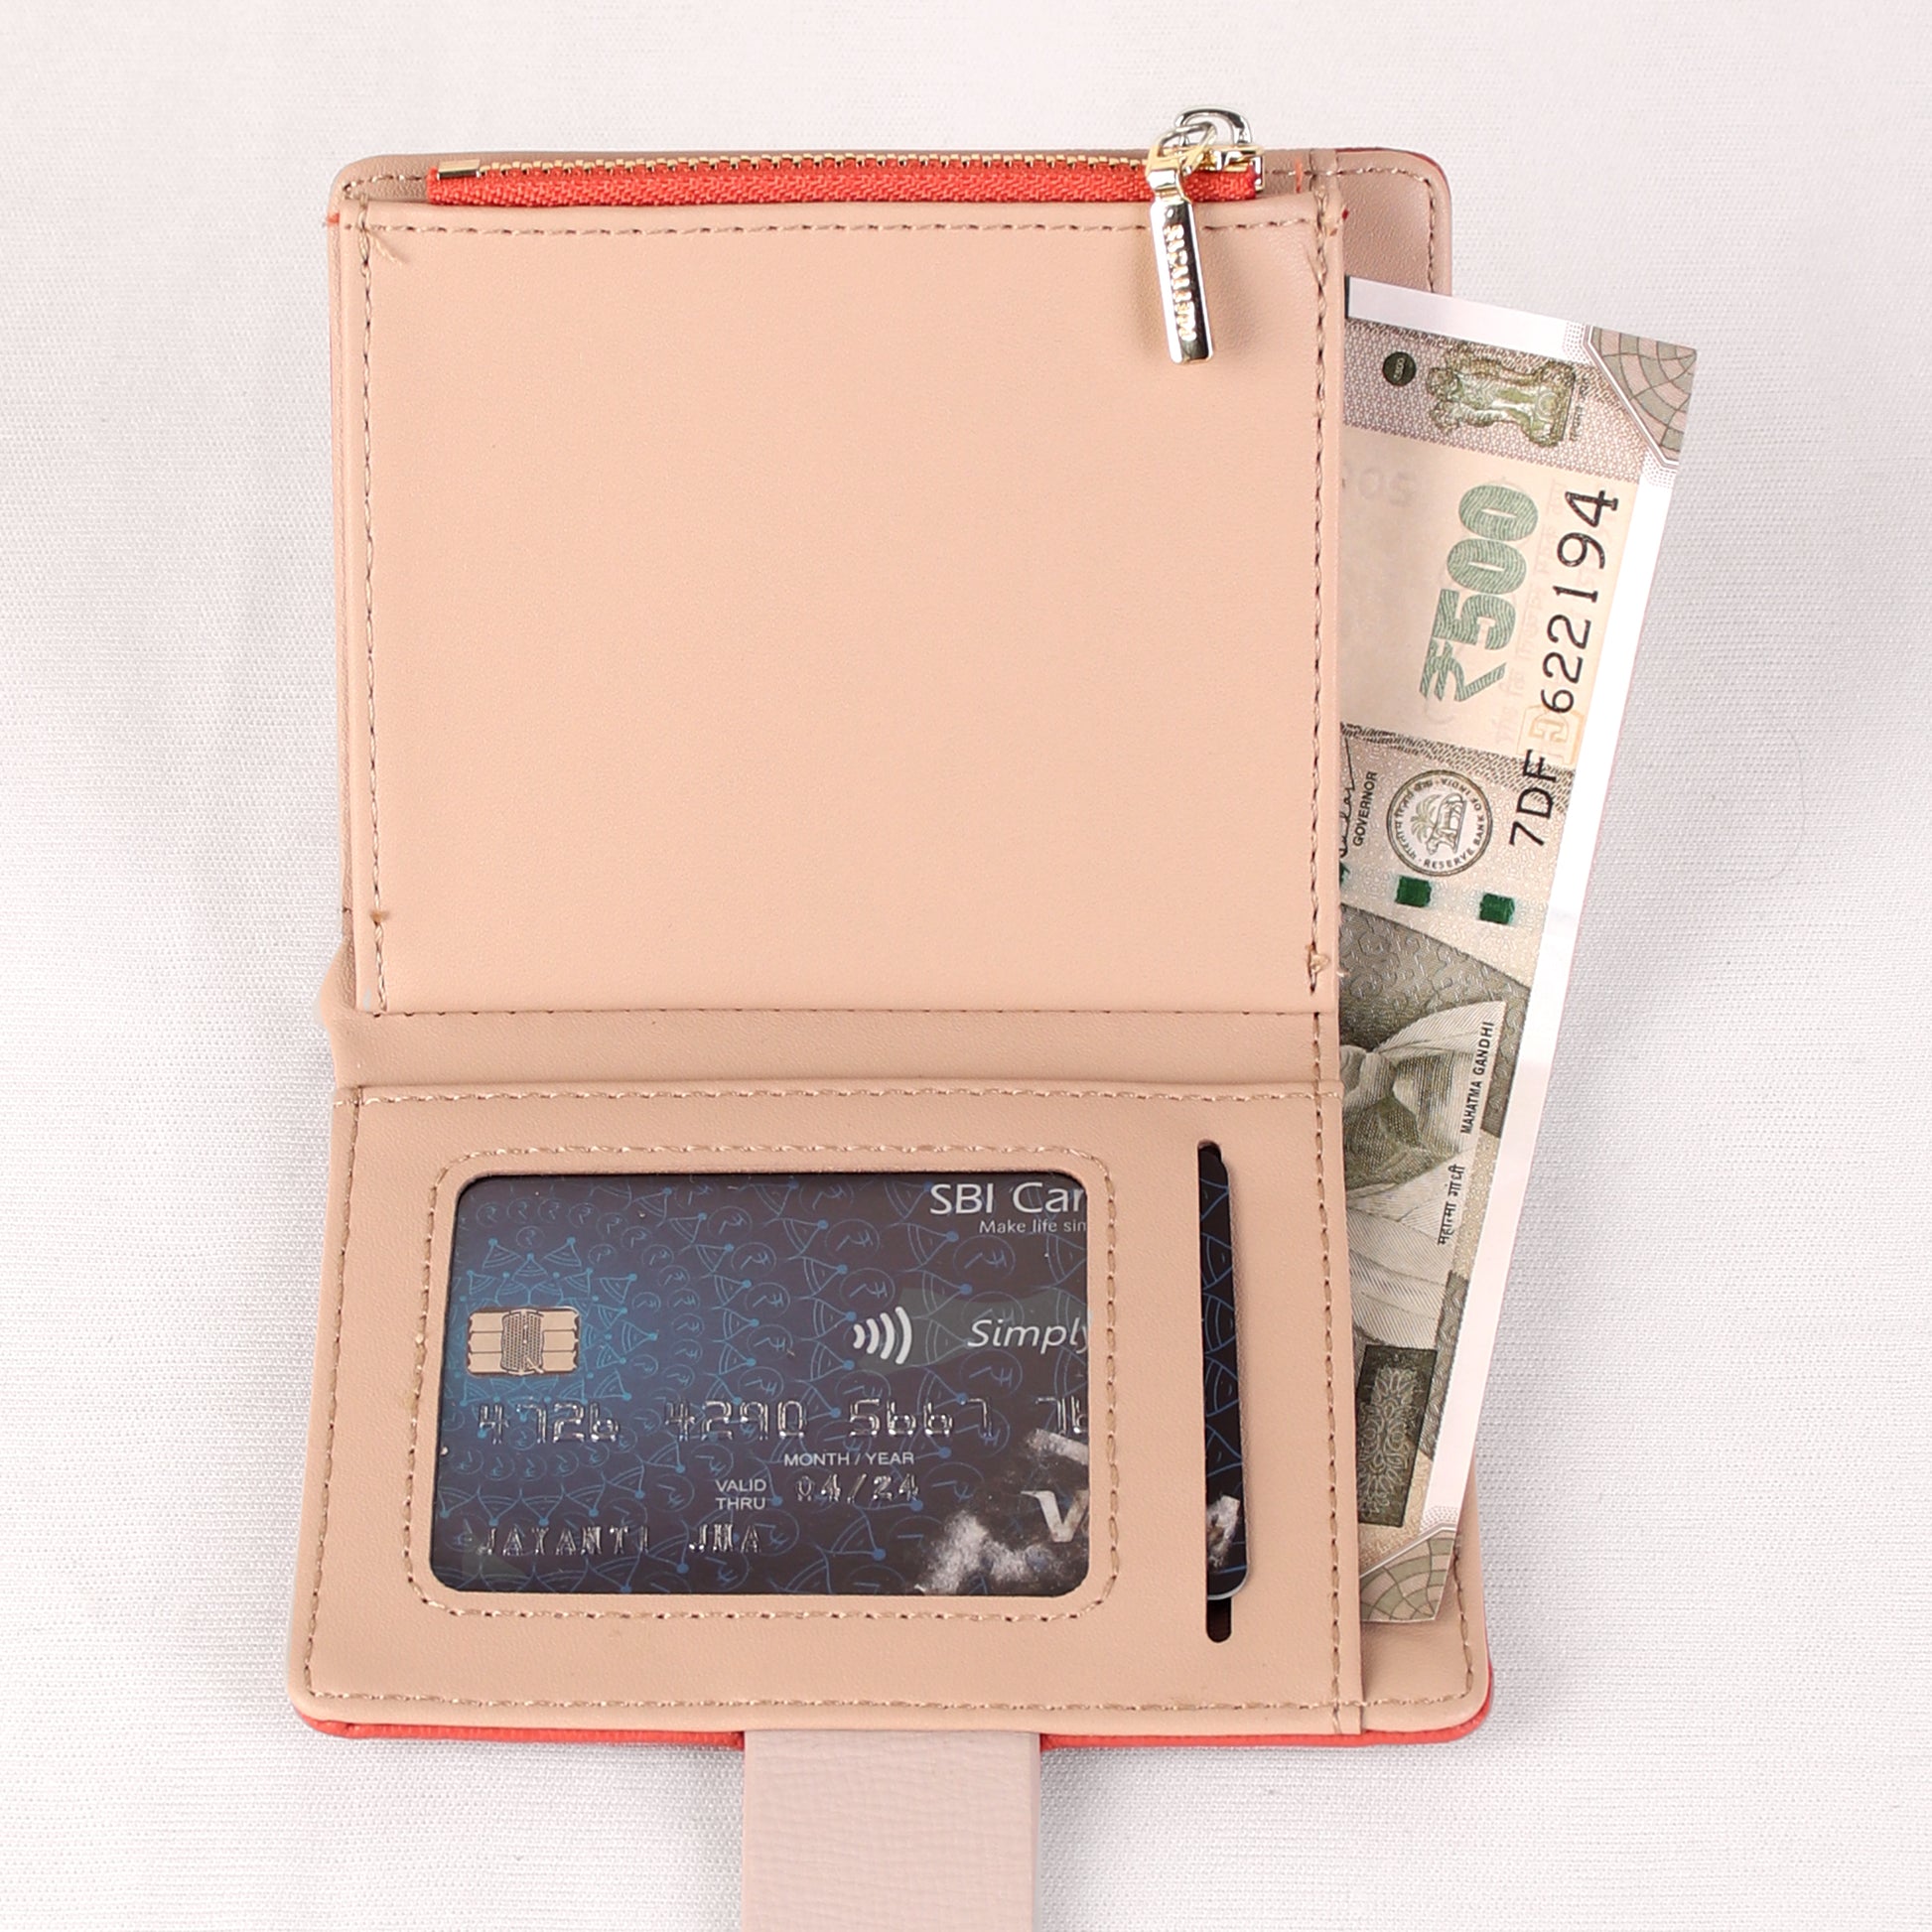 Wallet,The Peach Wallet with an Art - Cippele Multi Store